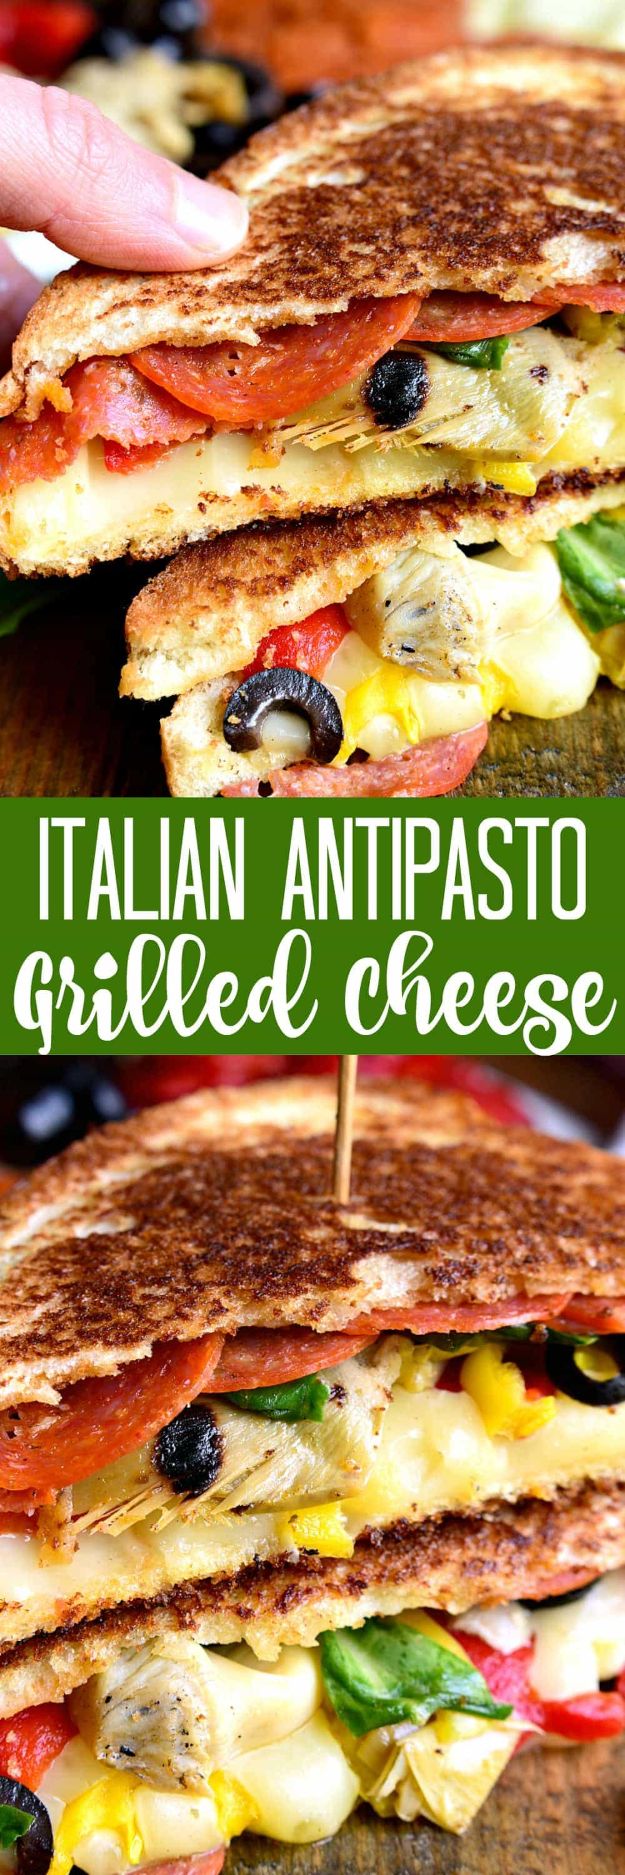 Best Recipes for the Cheese Lover - Italian Antipasto Grilled Cheese - Easy Recipe Ideas With Cheese - Homemade Appetizers, Dips, Dinners, Snacks, Pasta Dishes, Healthy Lunches and Soups Made With Your Favorite Cheeses - Ricotta, Cheddar, Swiss, Parmesan, Goat Chevre, Mozzarella and Feta Ideas - Grilled, Healthy, Vegan and Vegetarian #cheeserecipes #recipes #recipeideas #cheese #cheeserecipe 